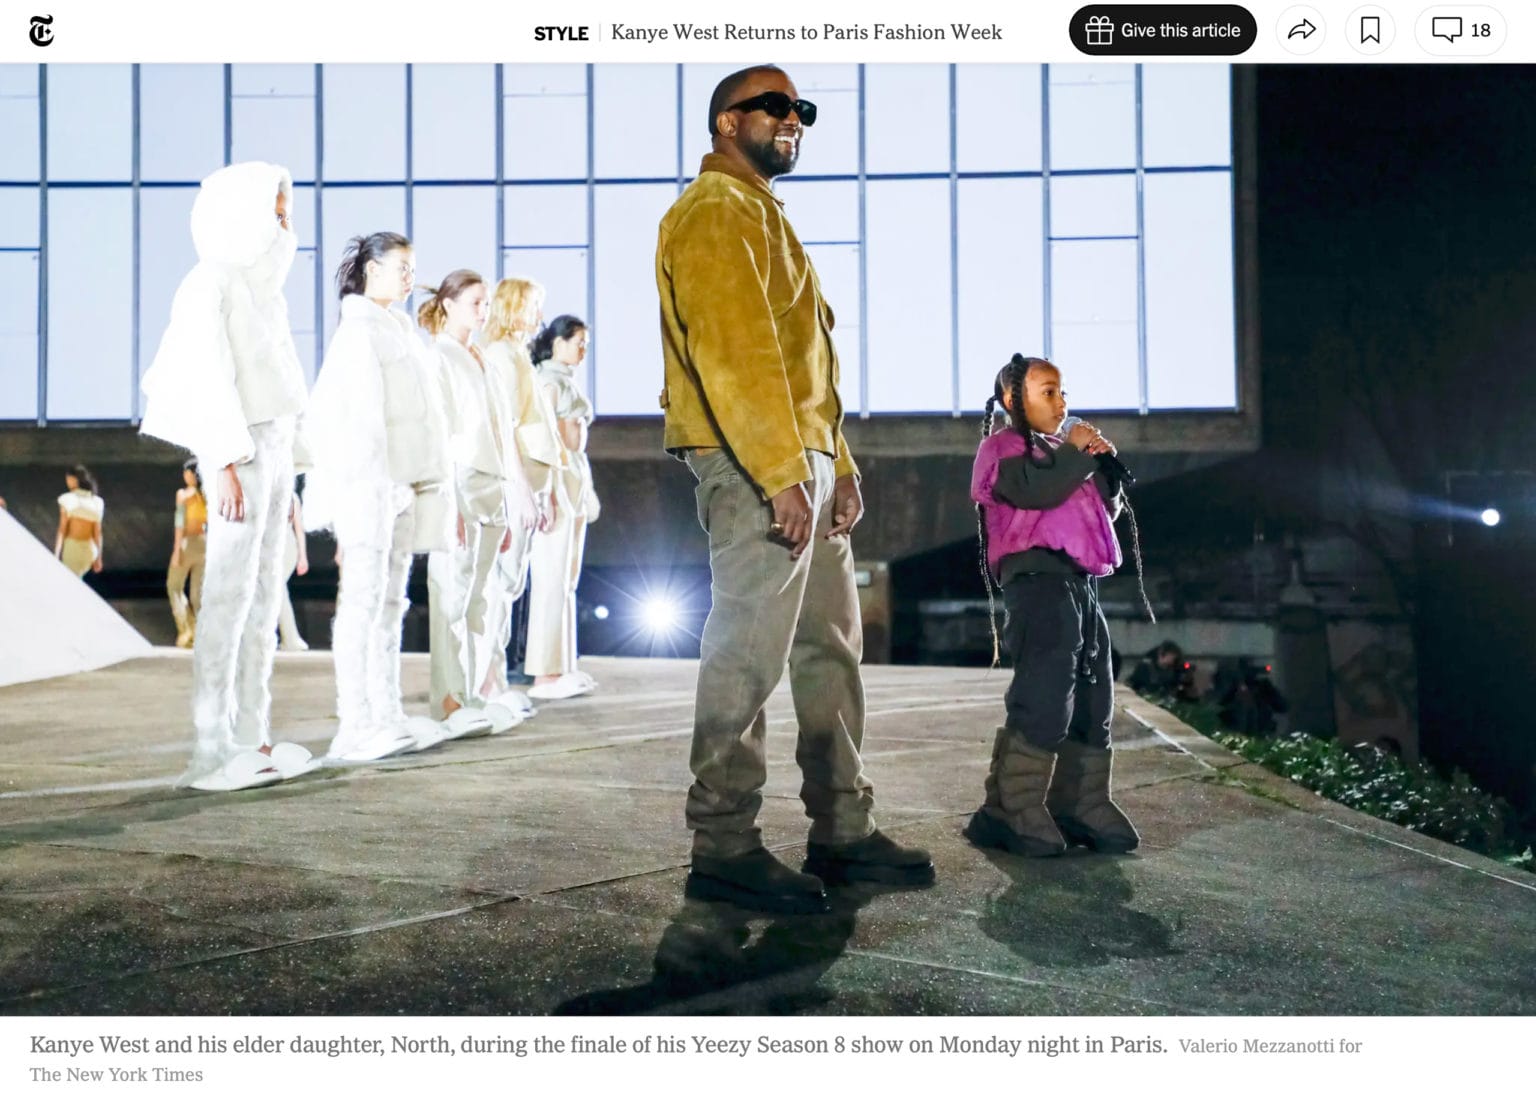 Kanye West and North West at the Yeezy Fashion show, Photo by Valerio Mezzanotti for The New York Times